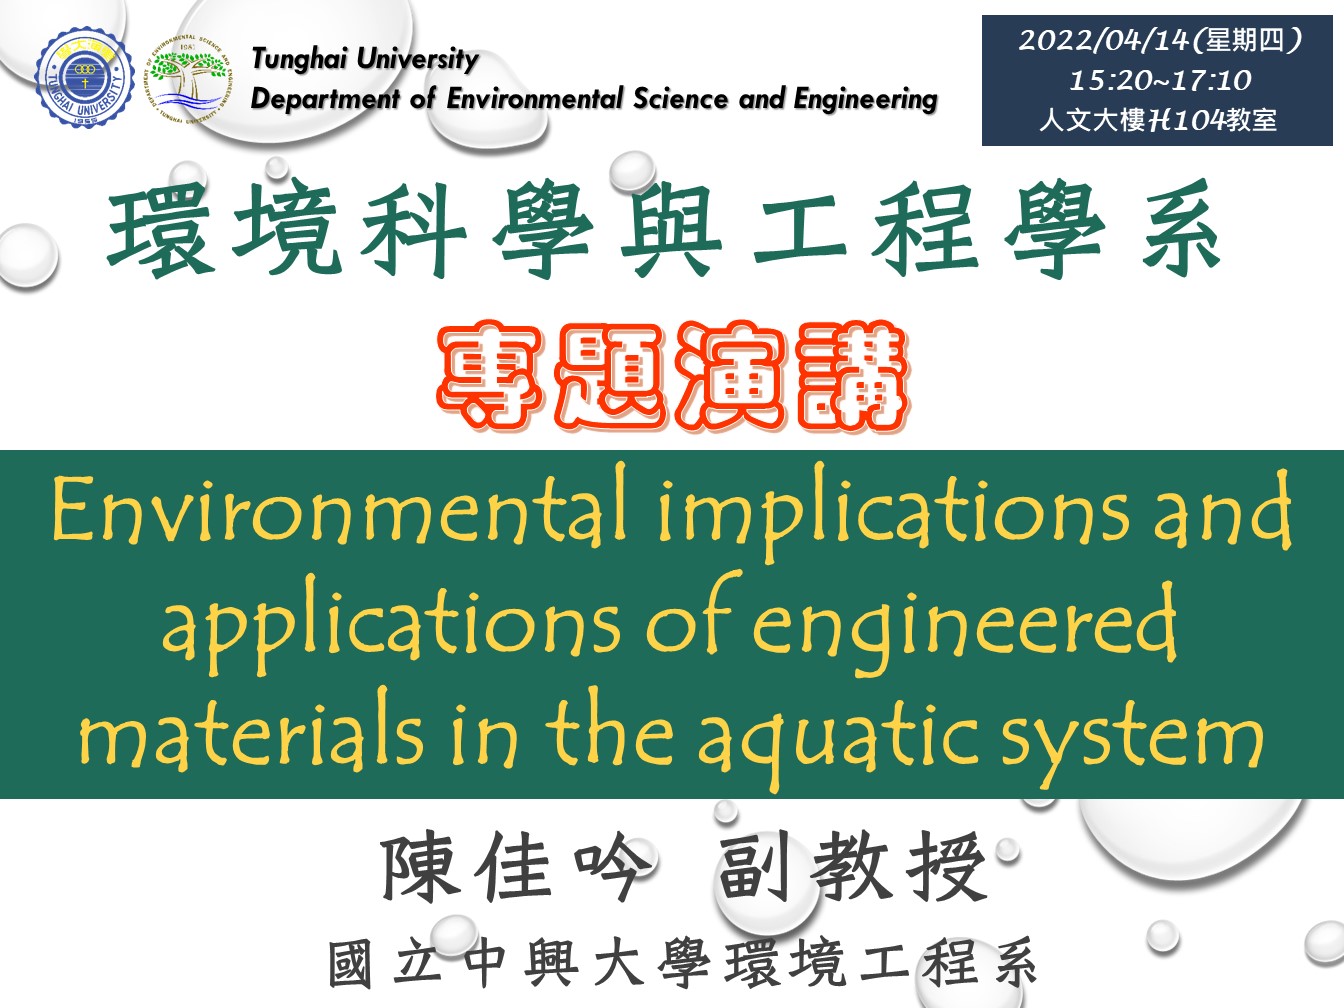 Environmental implications and applications of engineered materials in the aquatic system